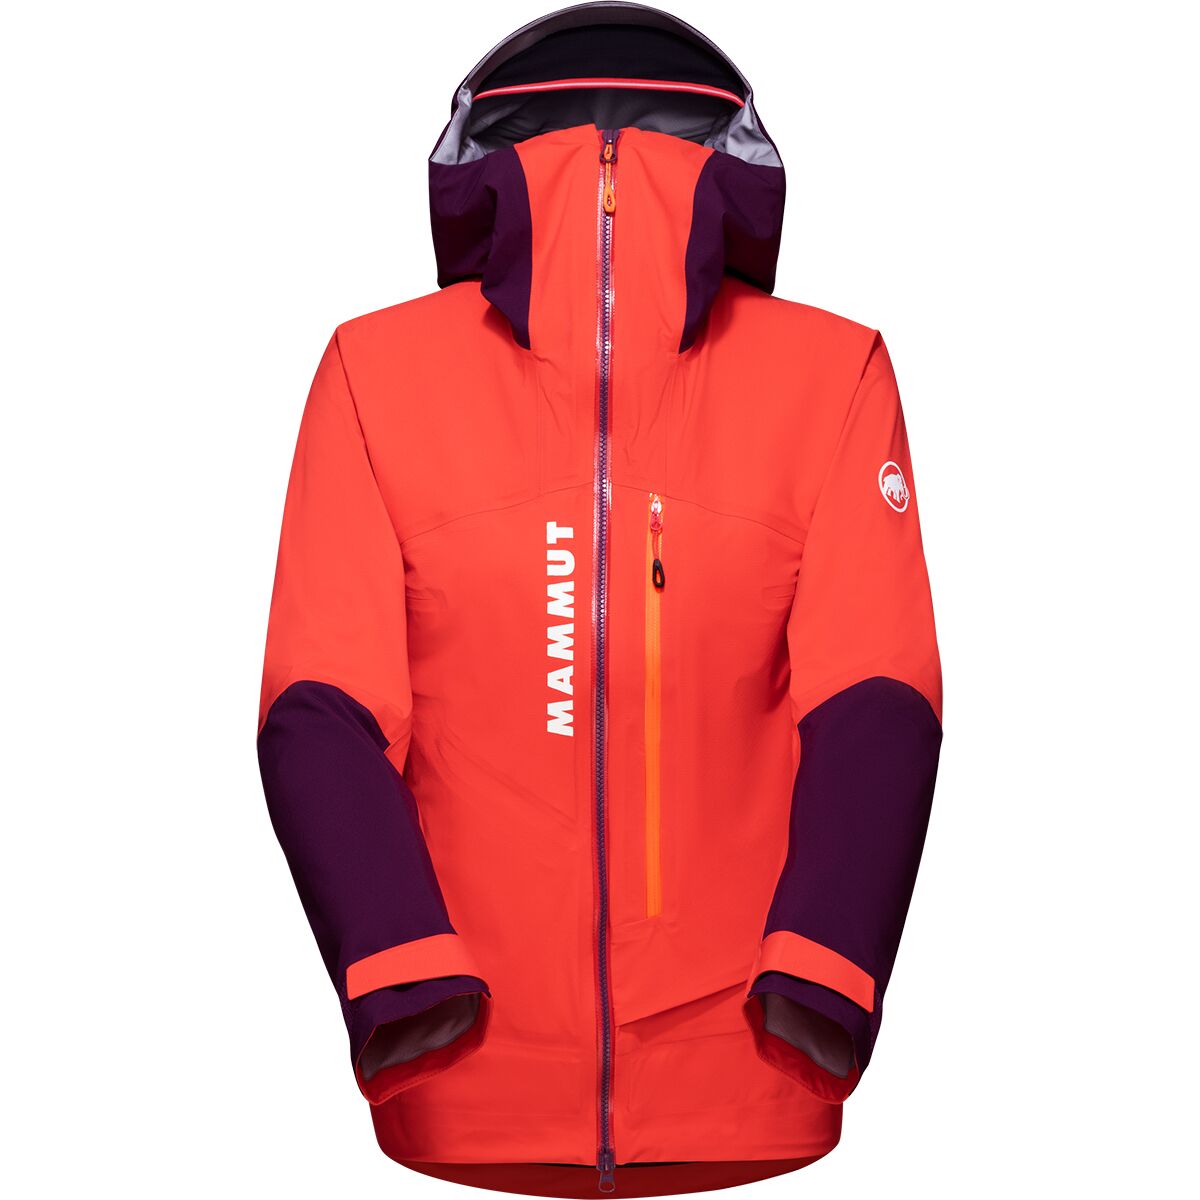 Mammut Aenergy Air HS Hooded Review